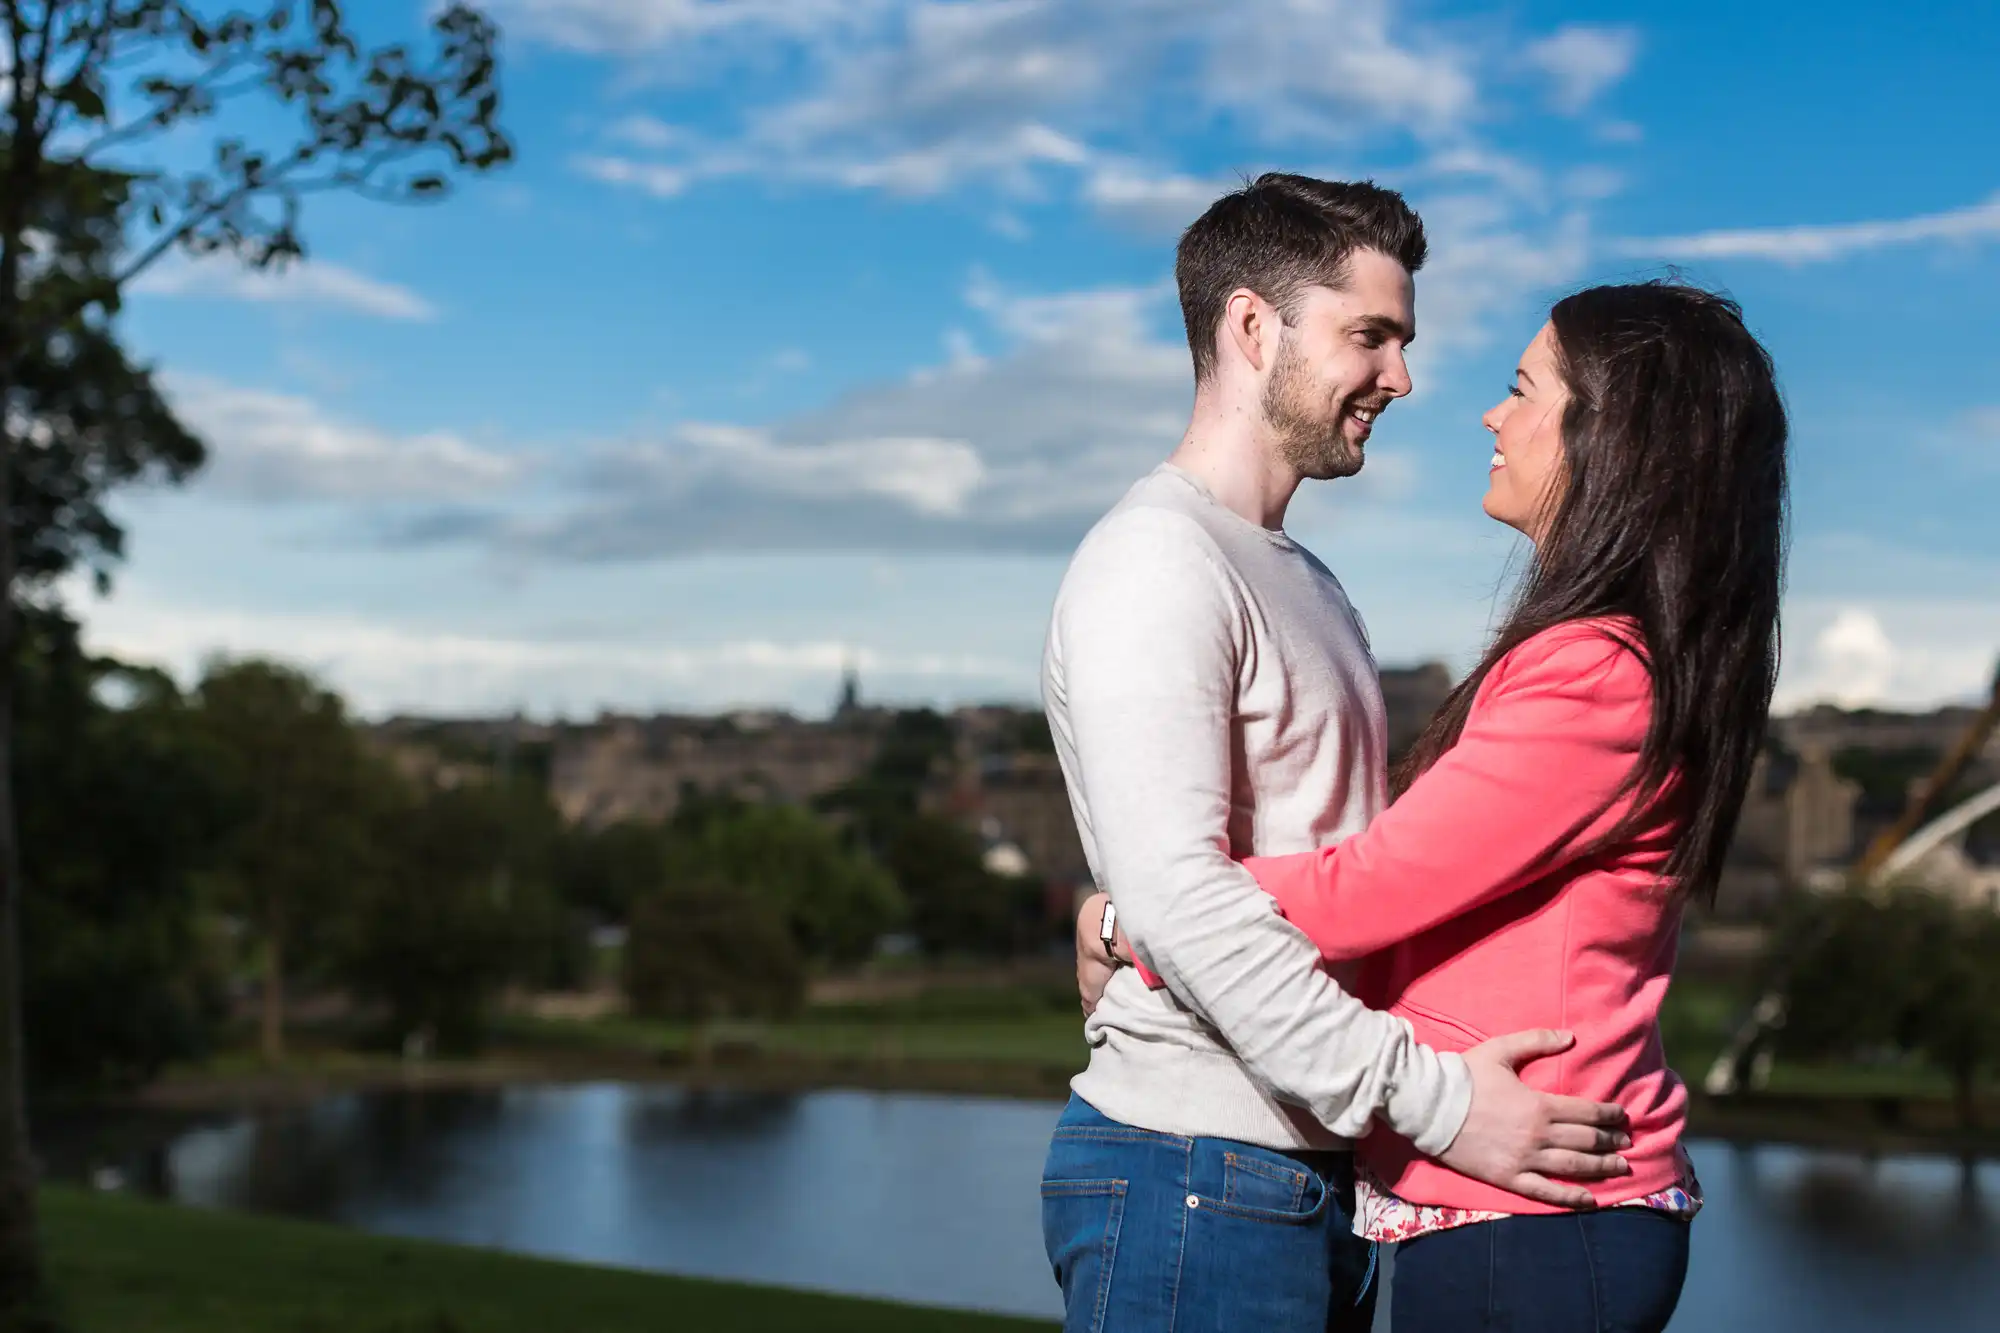 A couple smiling at each other, embracing in a park with a river and cityscape in the background on a sunny day.